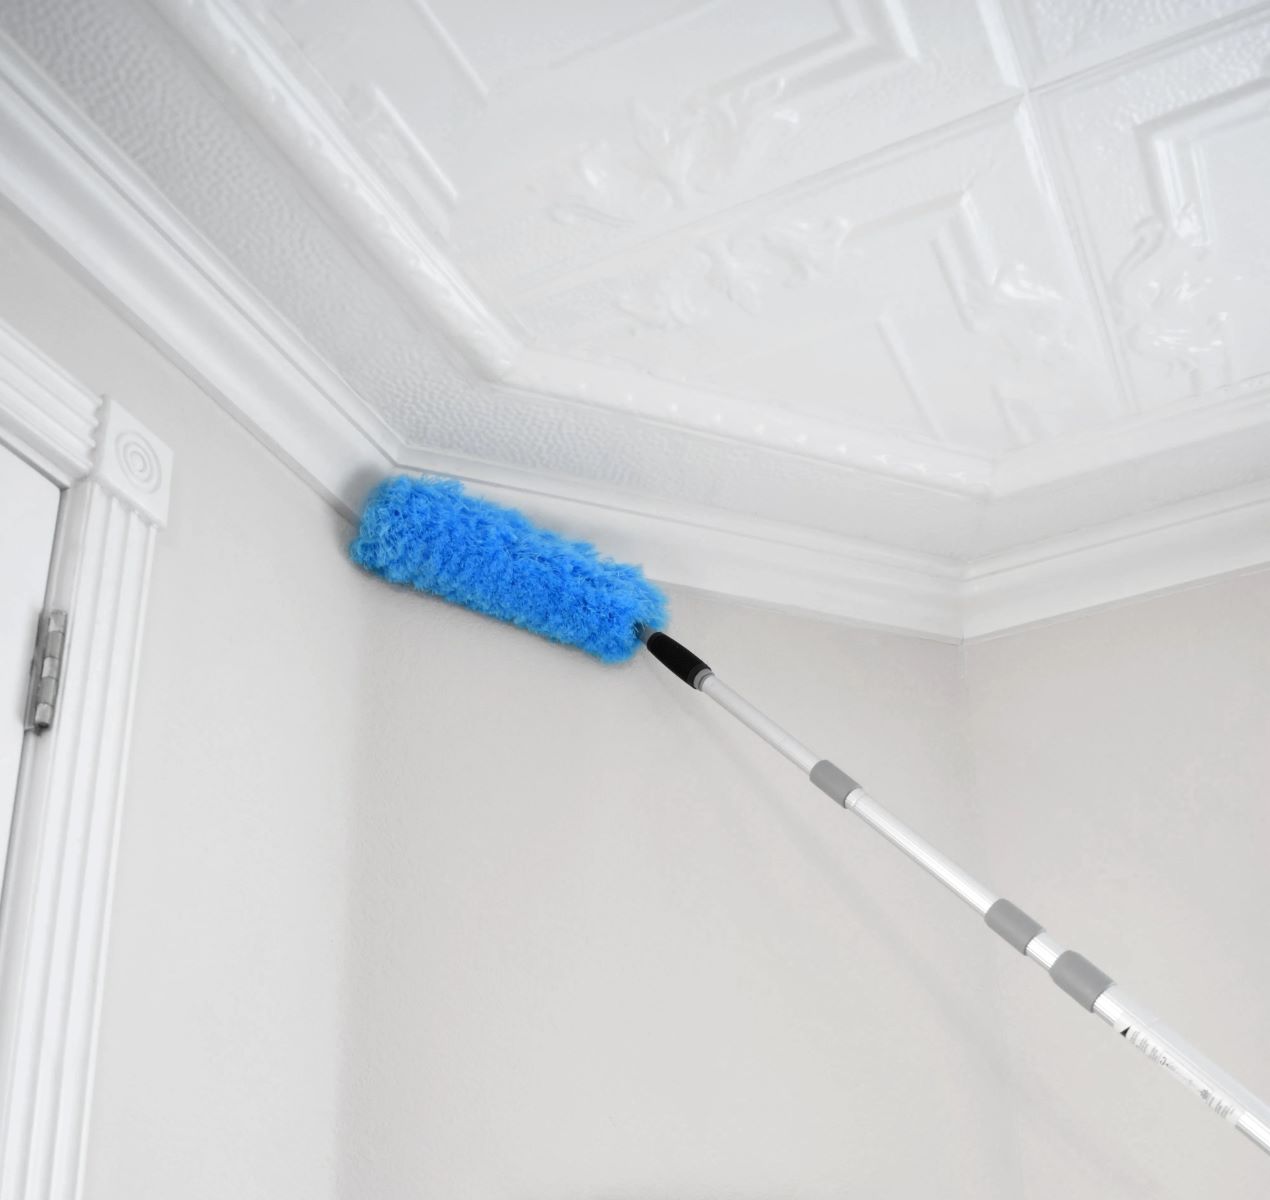  Wall Cleaner, Max 66'' Wall Mop with Long Handle